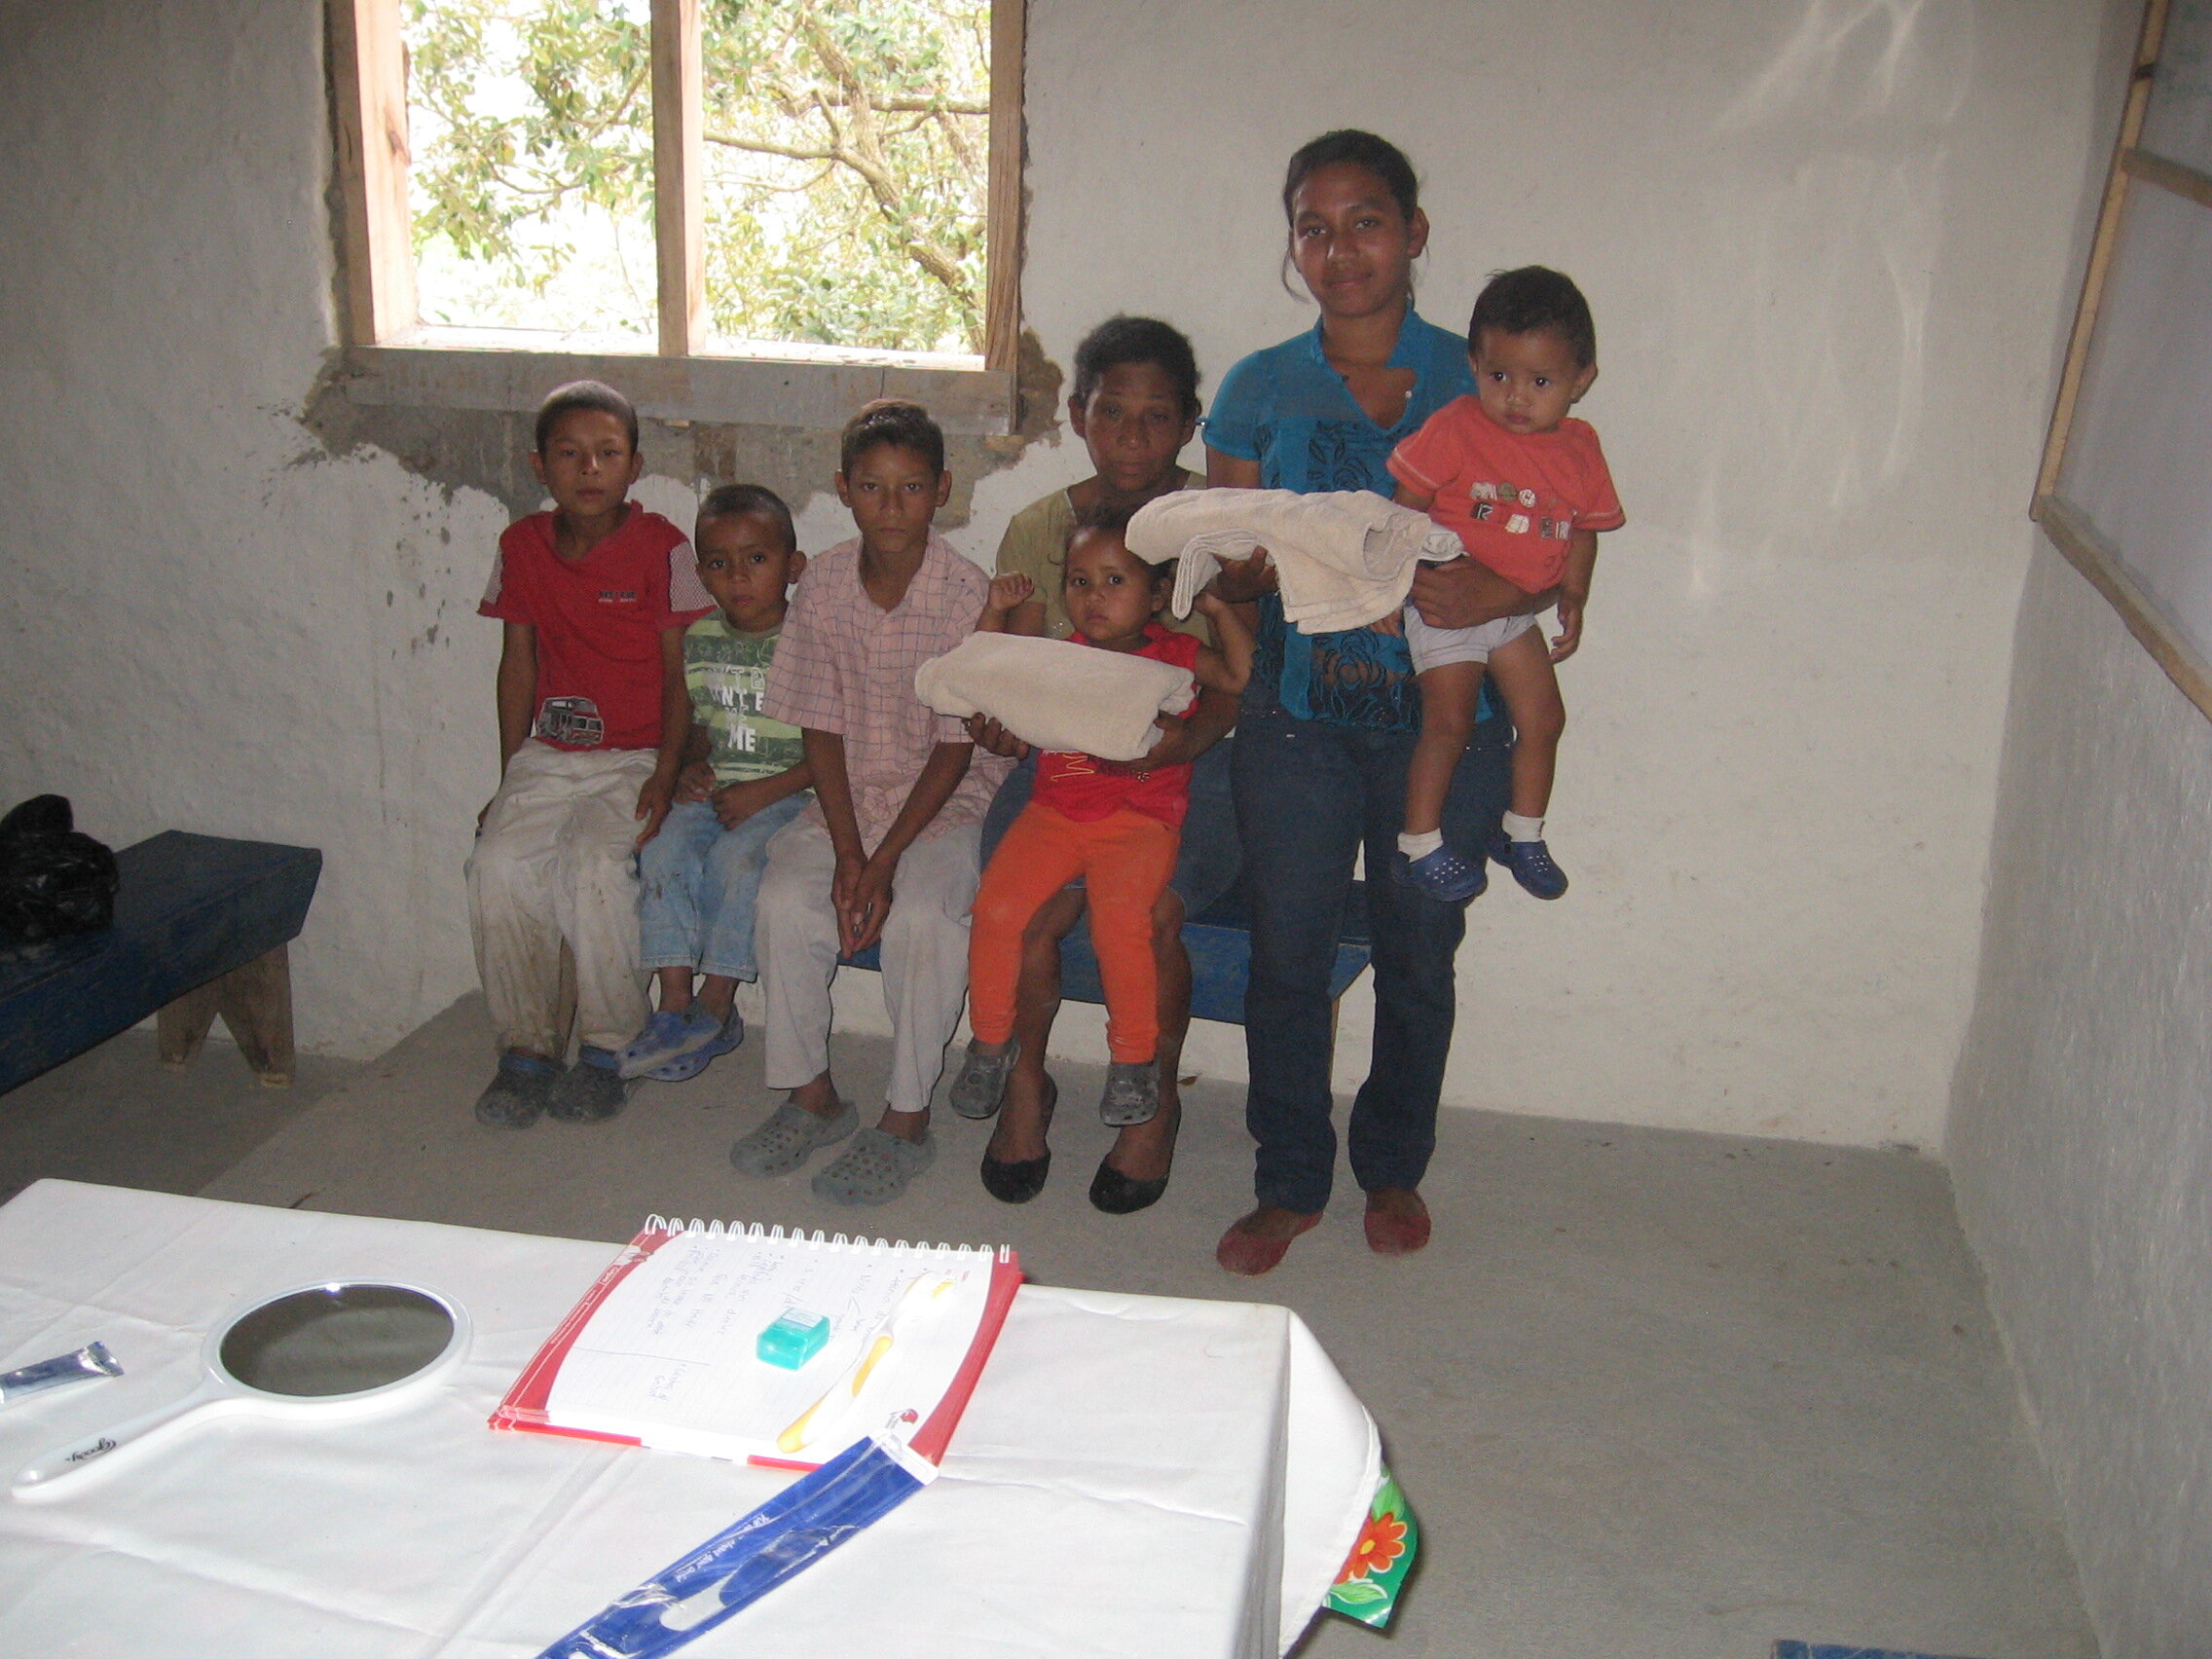 A Carrizalito family with new towels, toothbrushes and toothpaste.